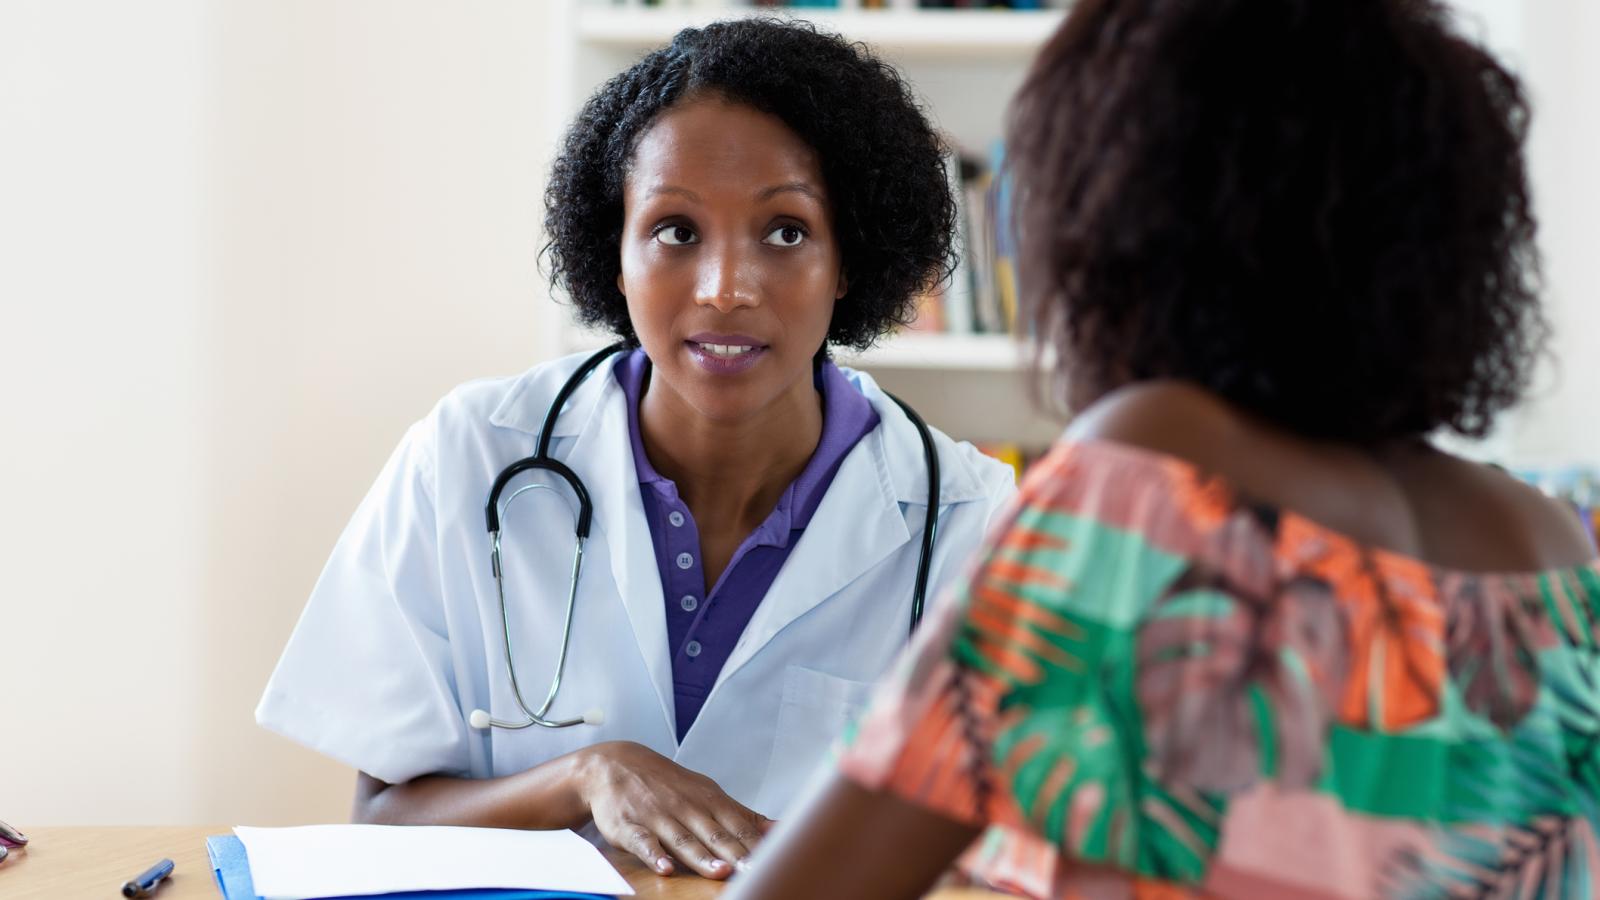 A black female doctor talking to a black female patient